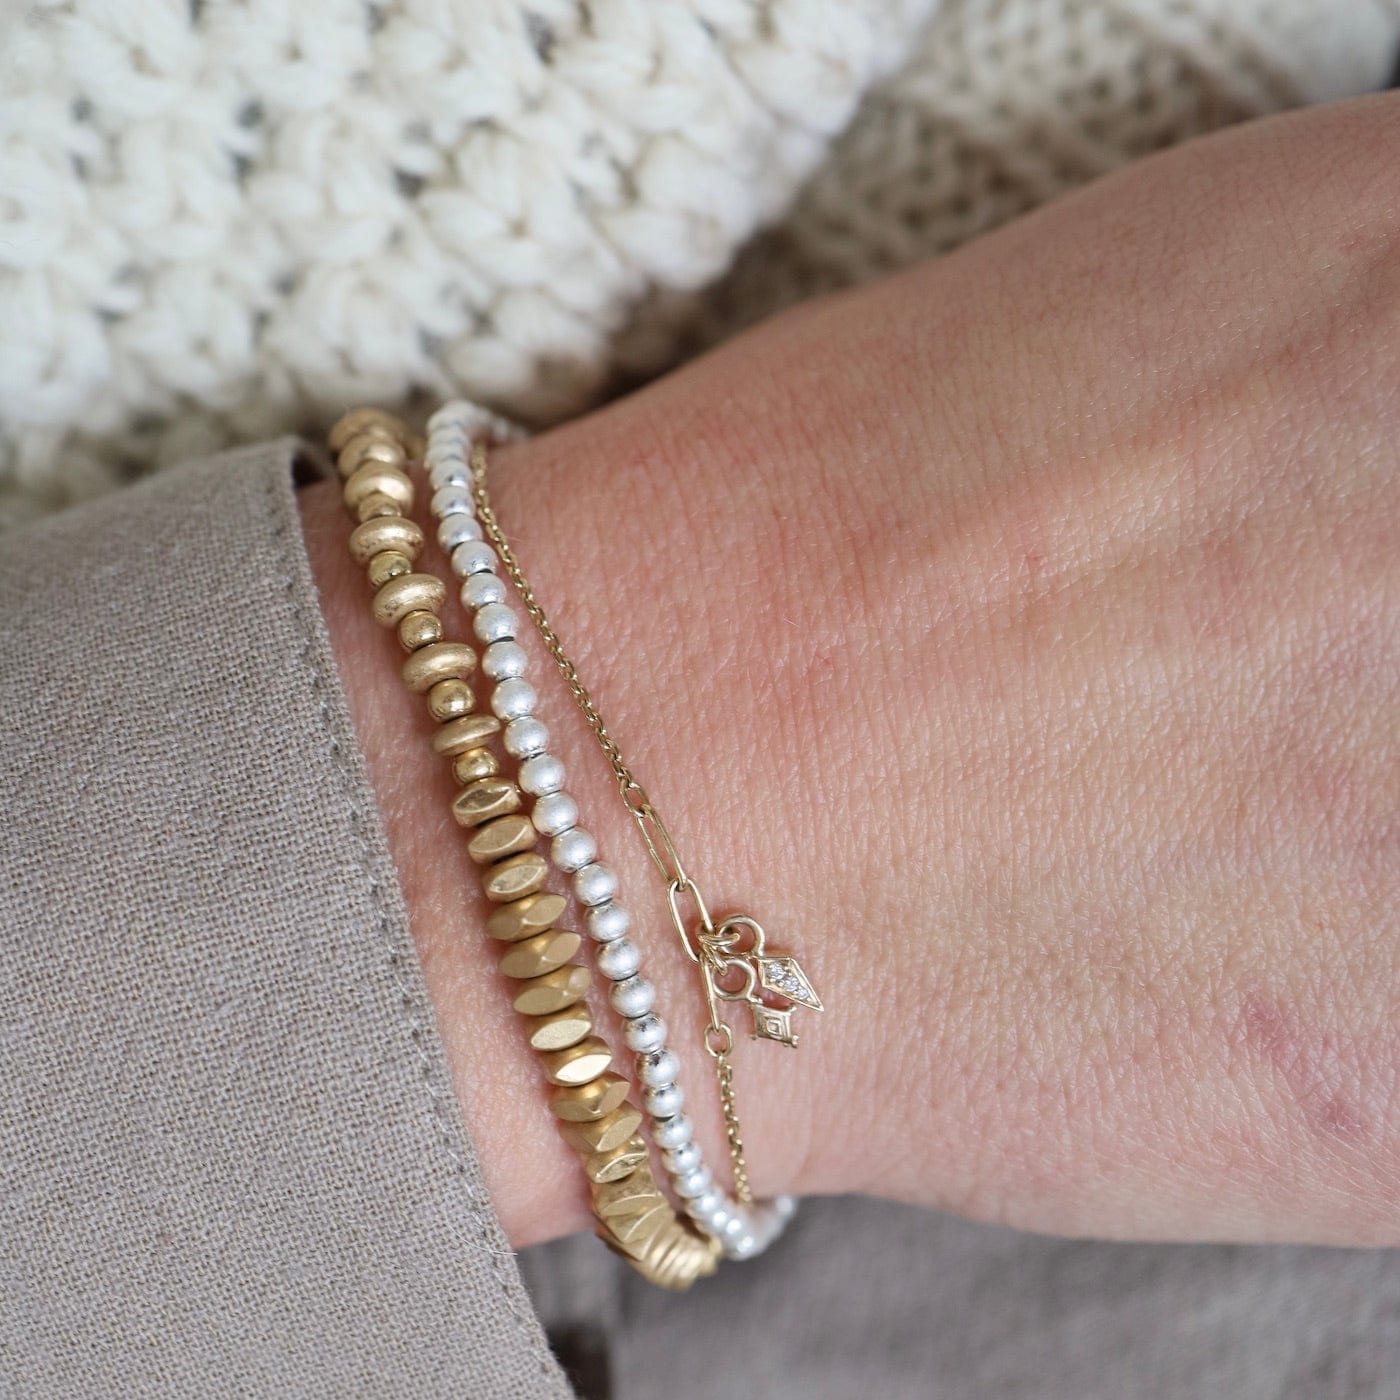 Two Tone Bracelet, Gold and Silver Beaded Bracelets, Stacking Ball